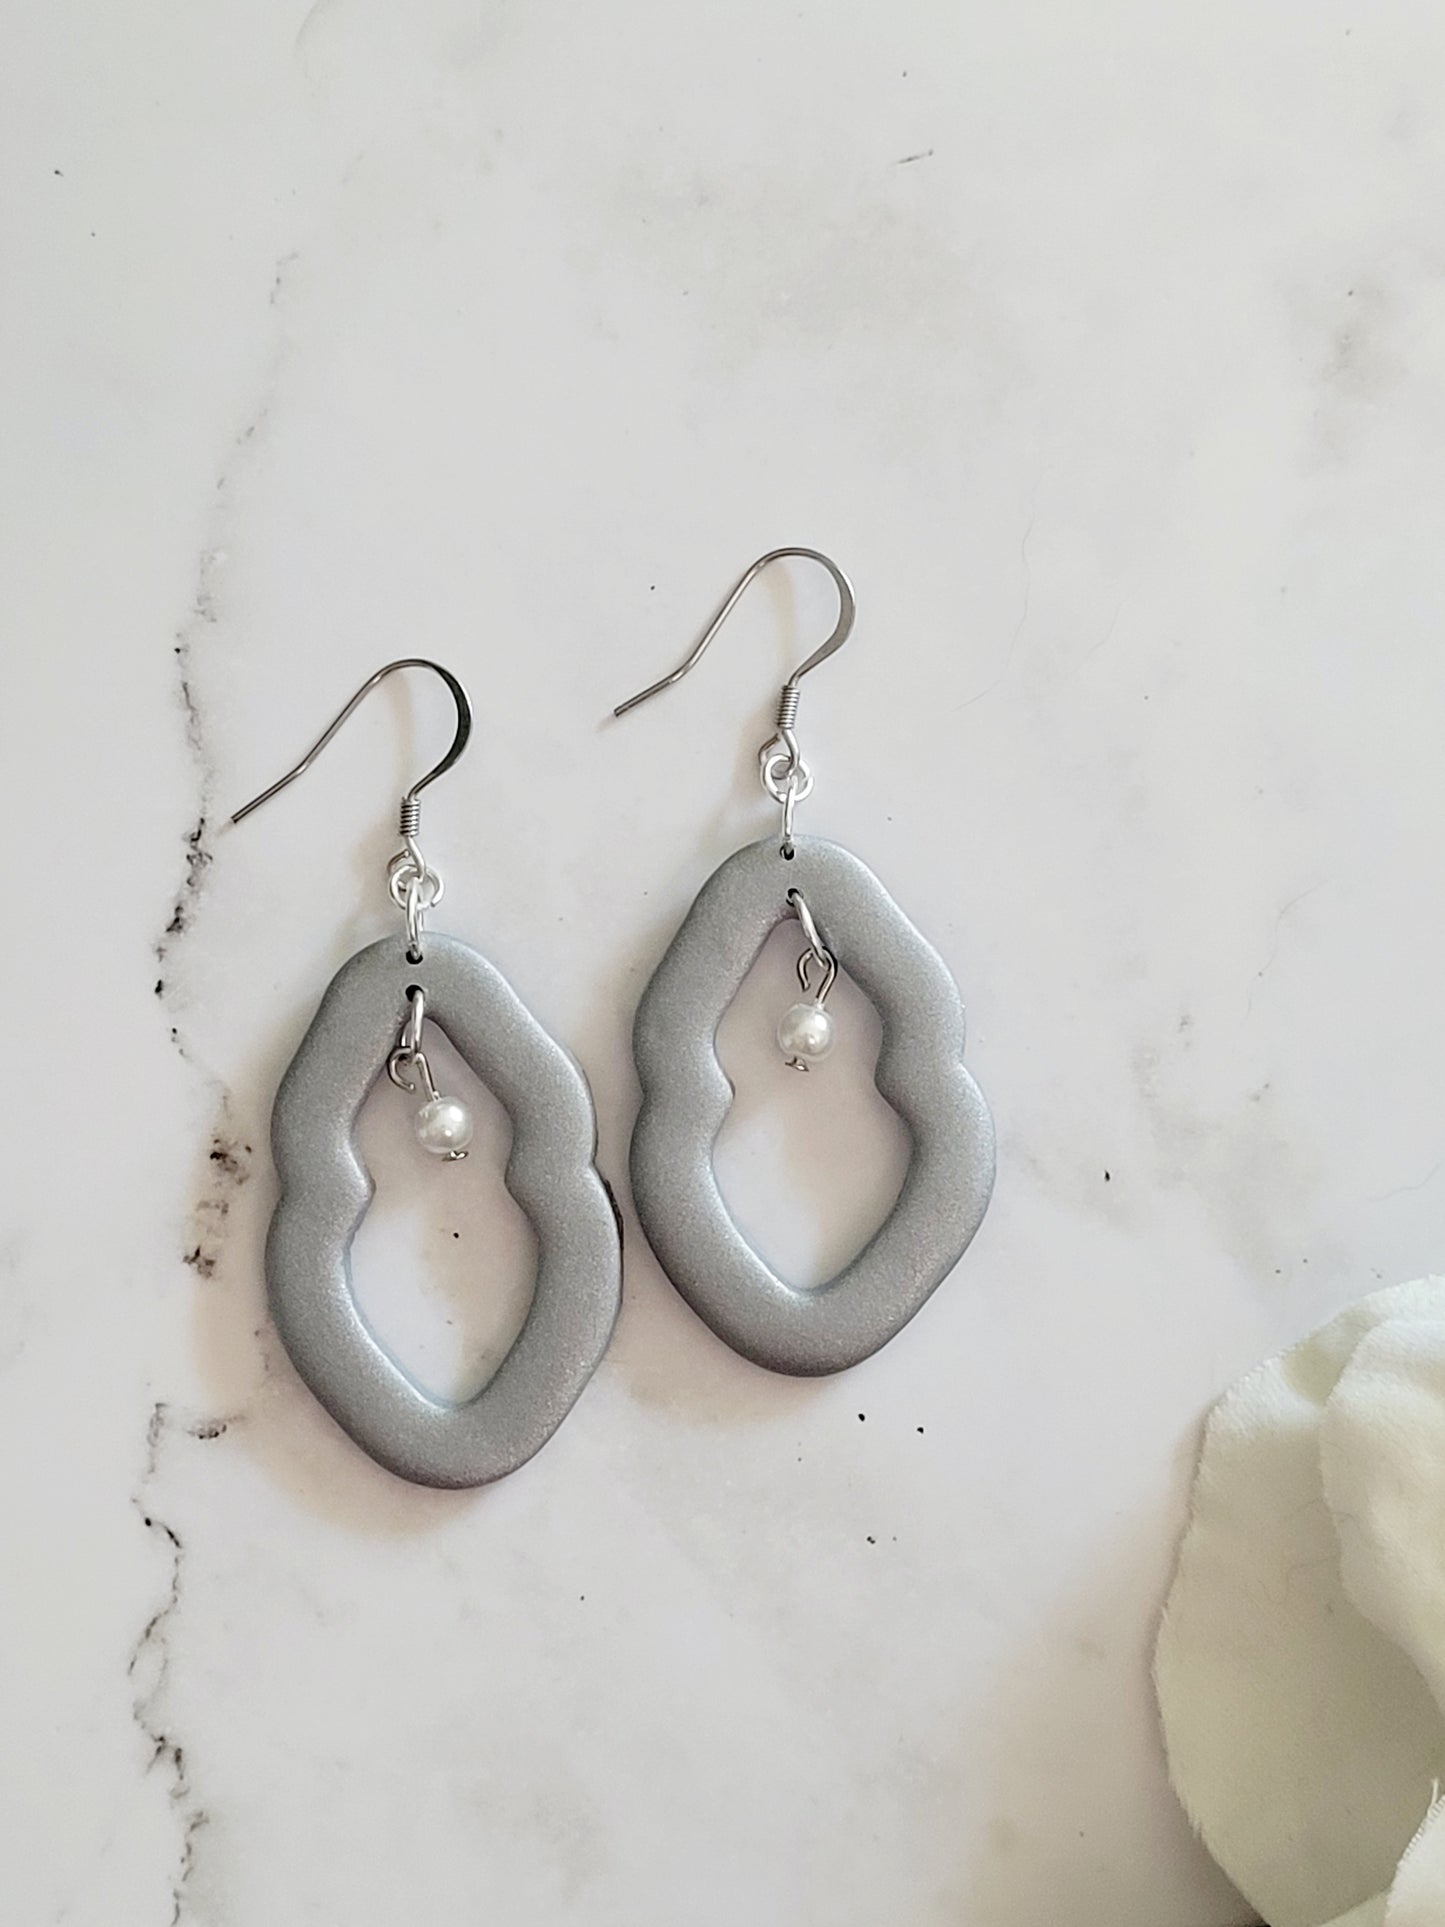 Closeup of large silver Vulva shaped earrings with pearl bead